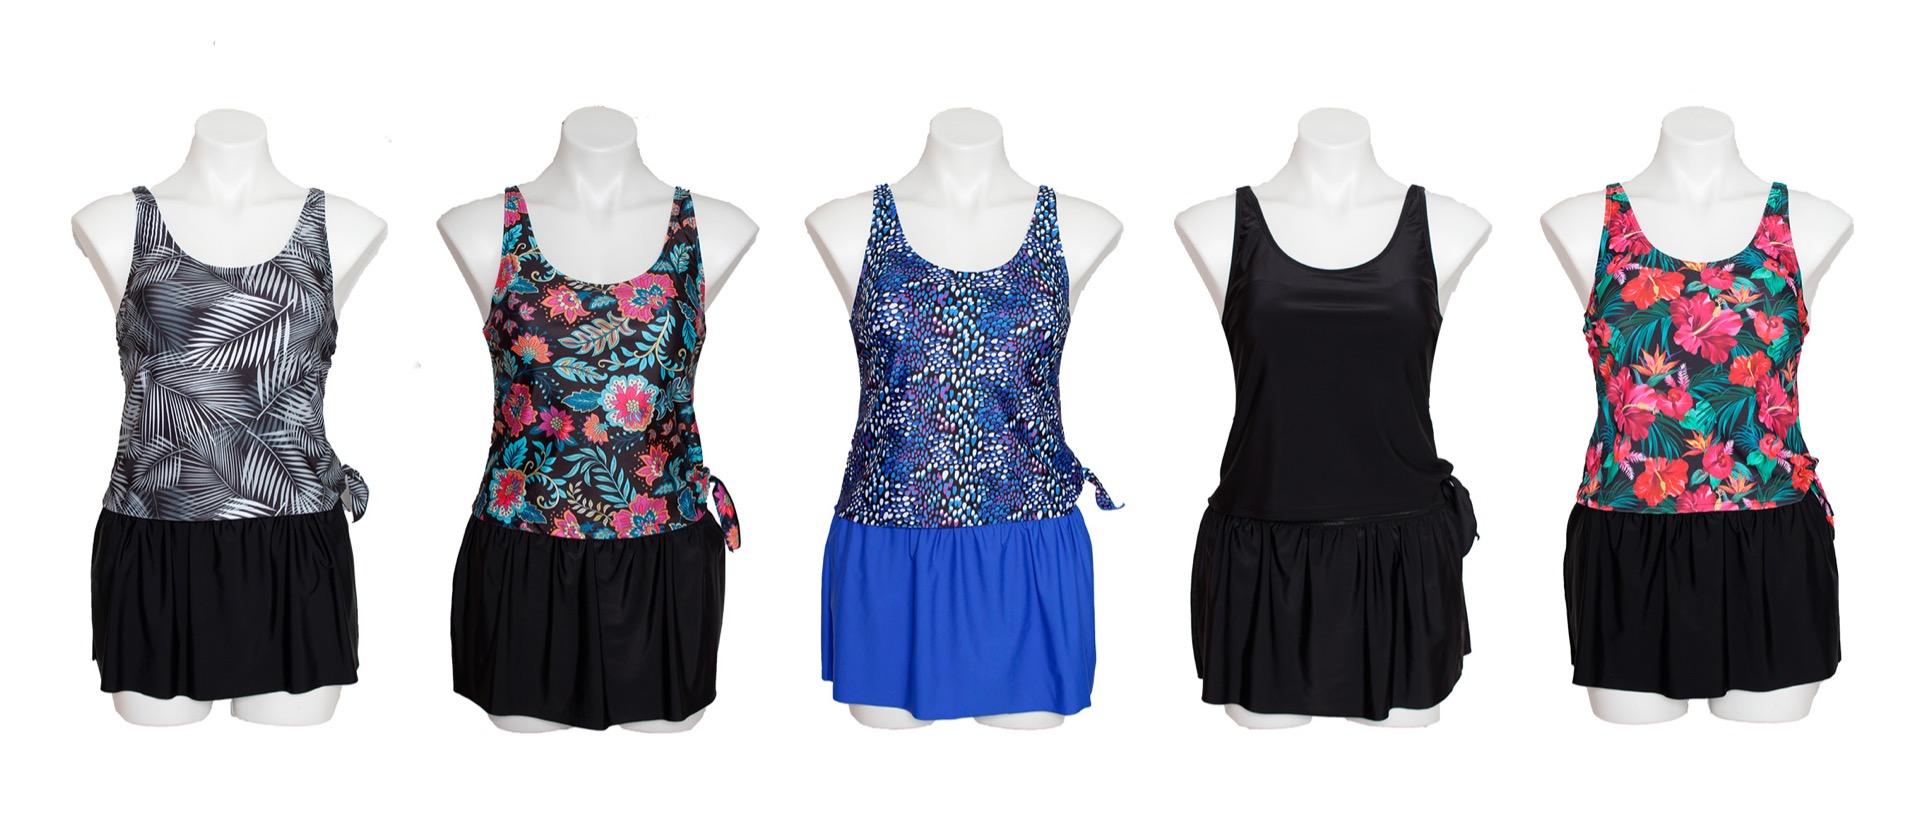 ''Women's Fashion Skirted One-Piece Tankini Swimsuits - Floral, Reptile, & Solid Print -  Sizes Small